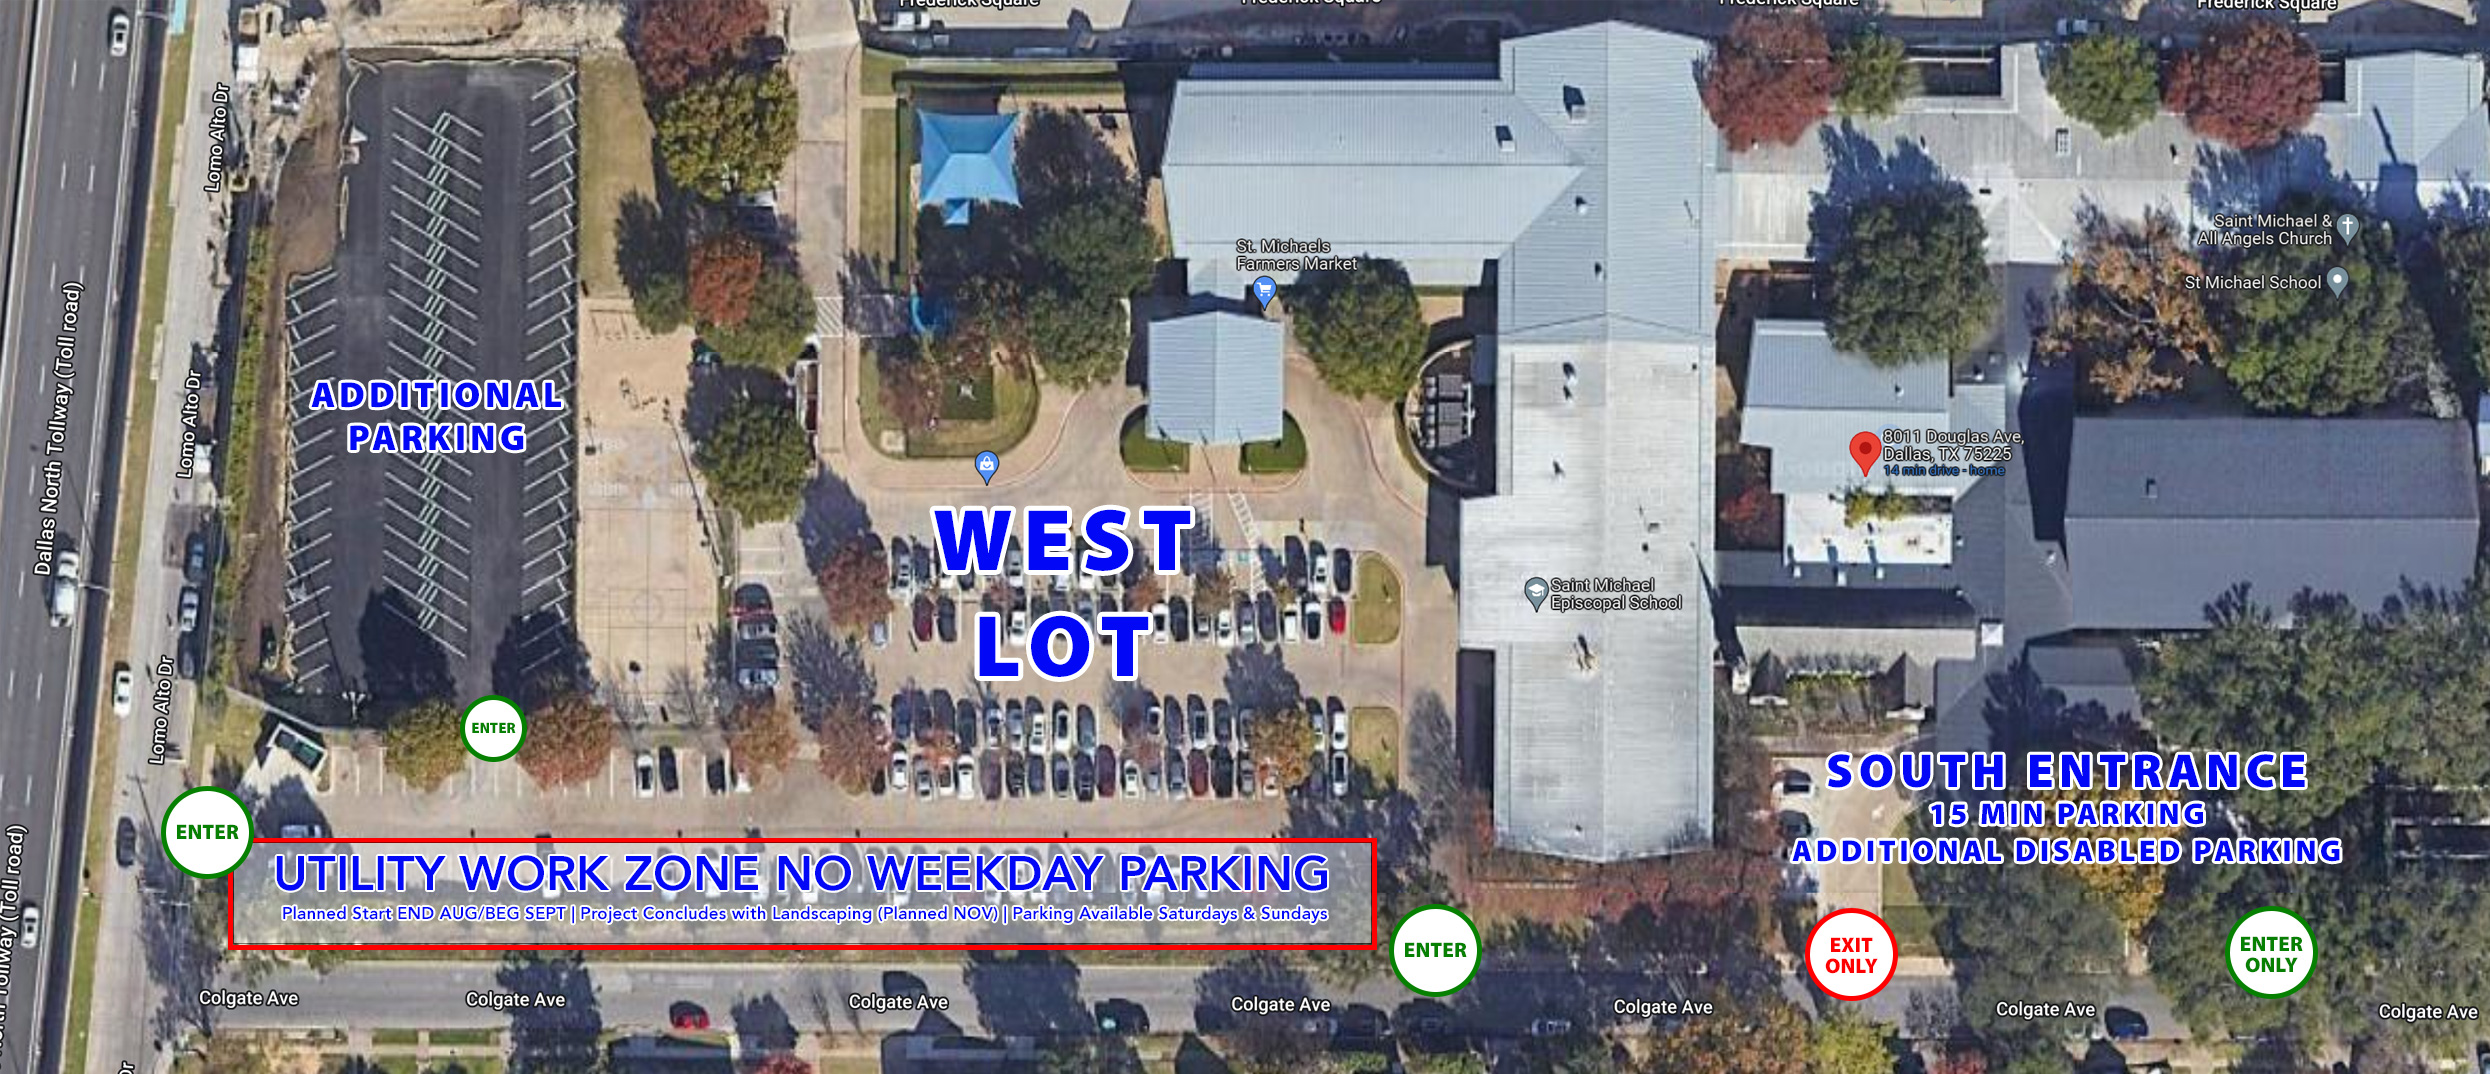 smaa-west-lot-utility-work-map-parking-map_773